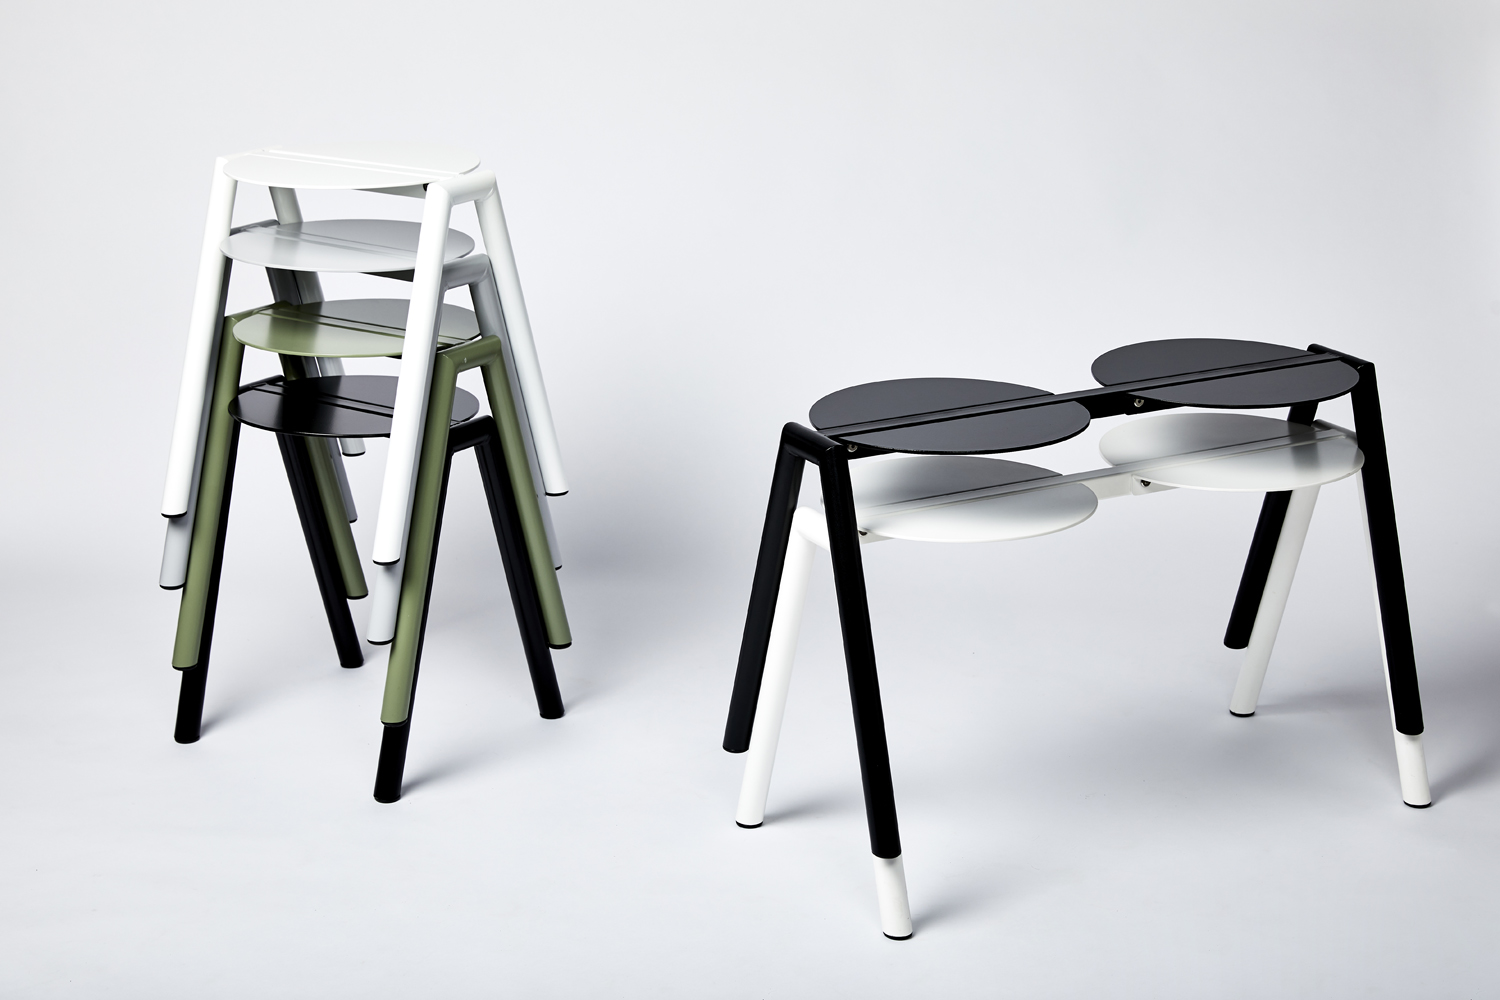 Stance by Furnished Forever available at designcraft Canberra